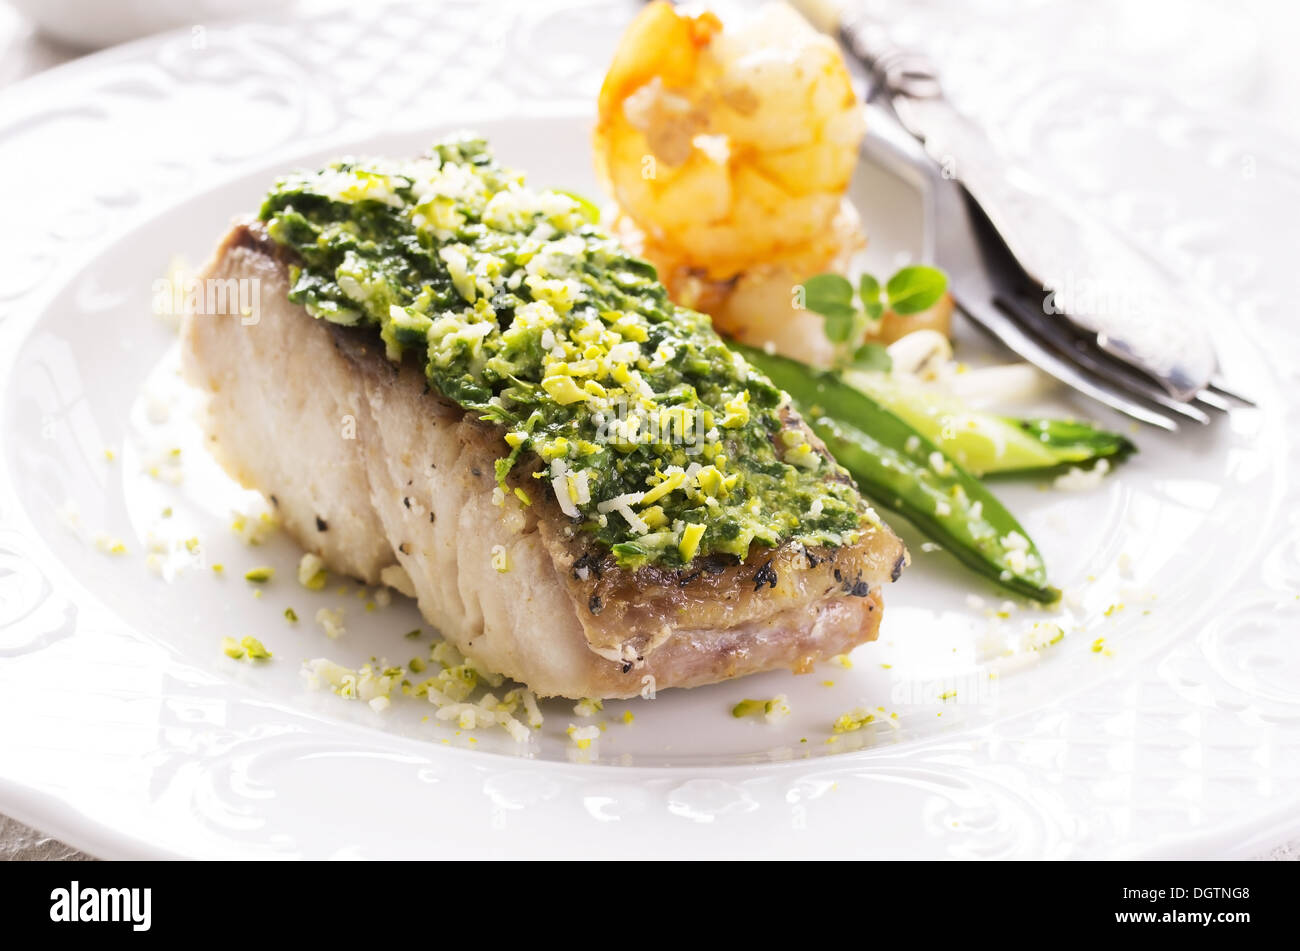 fish filet fired with herbs Stock Photo